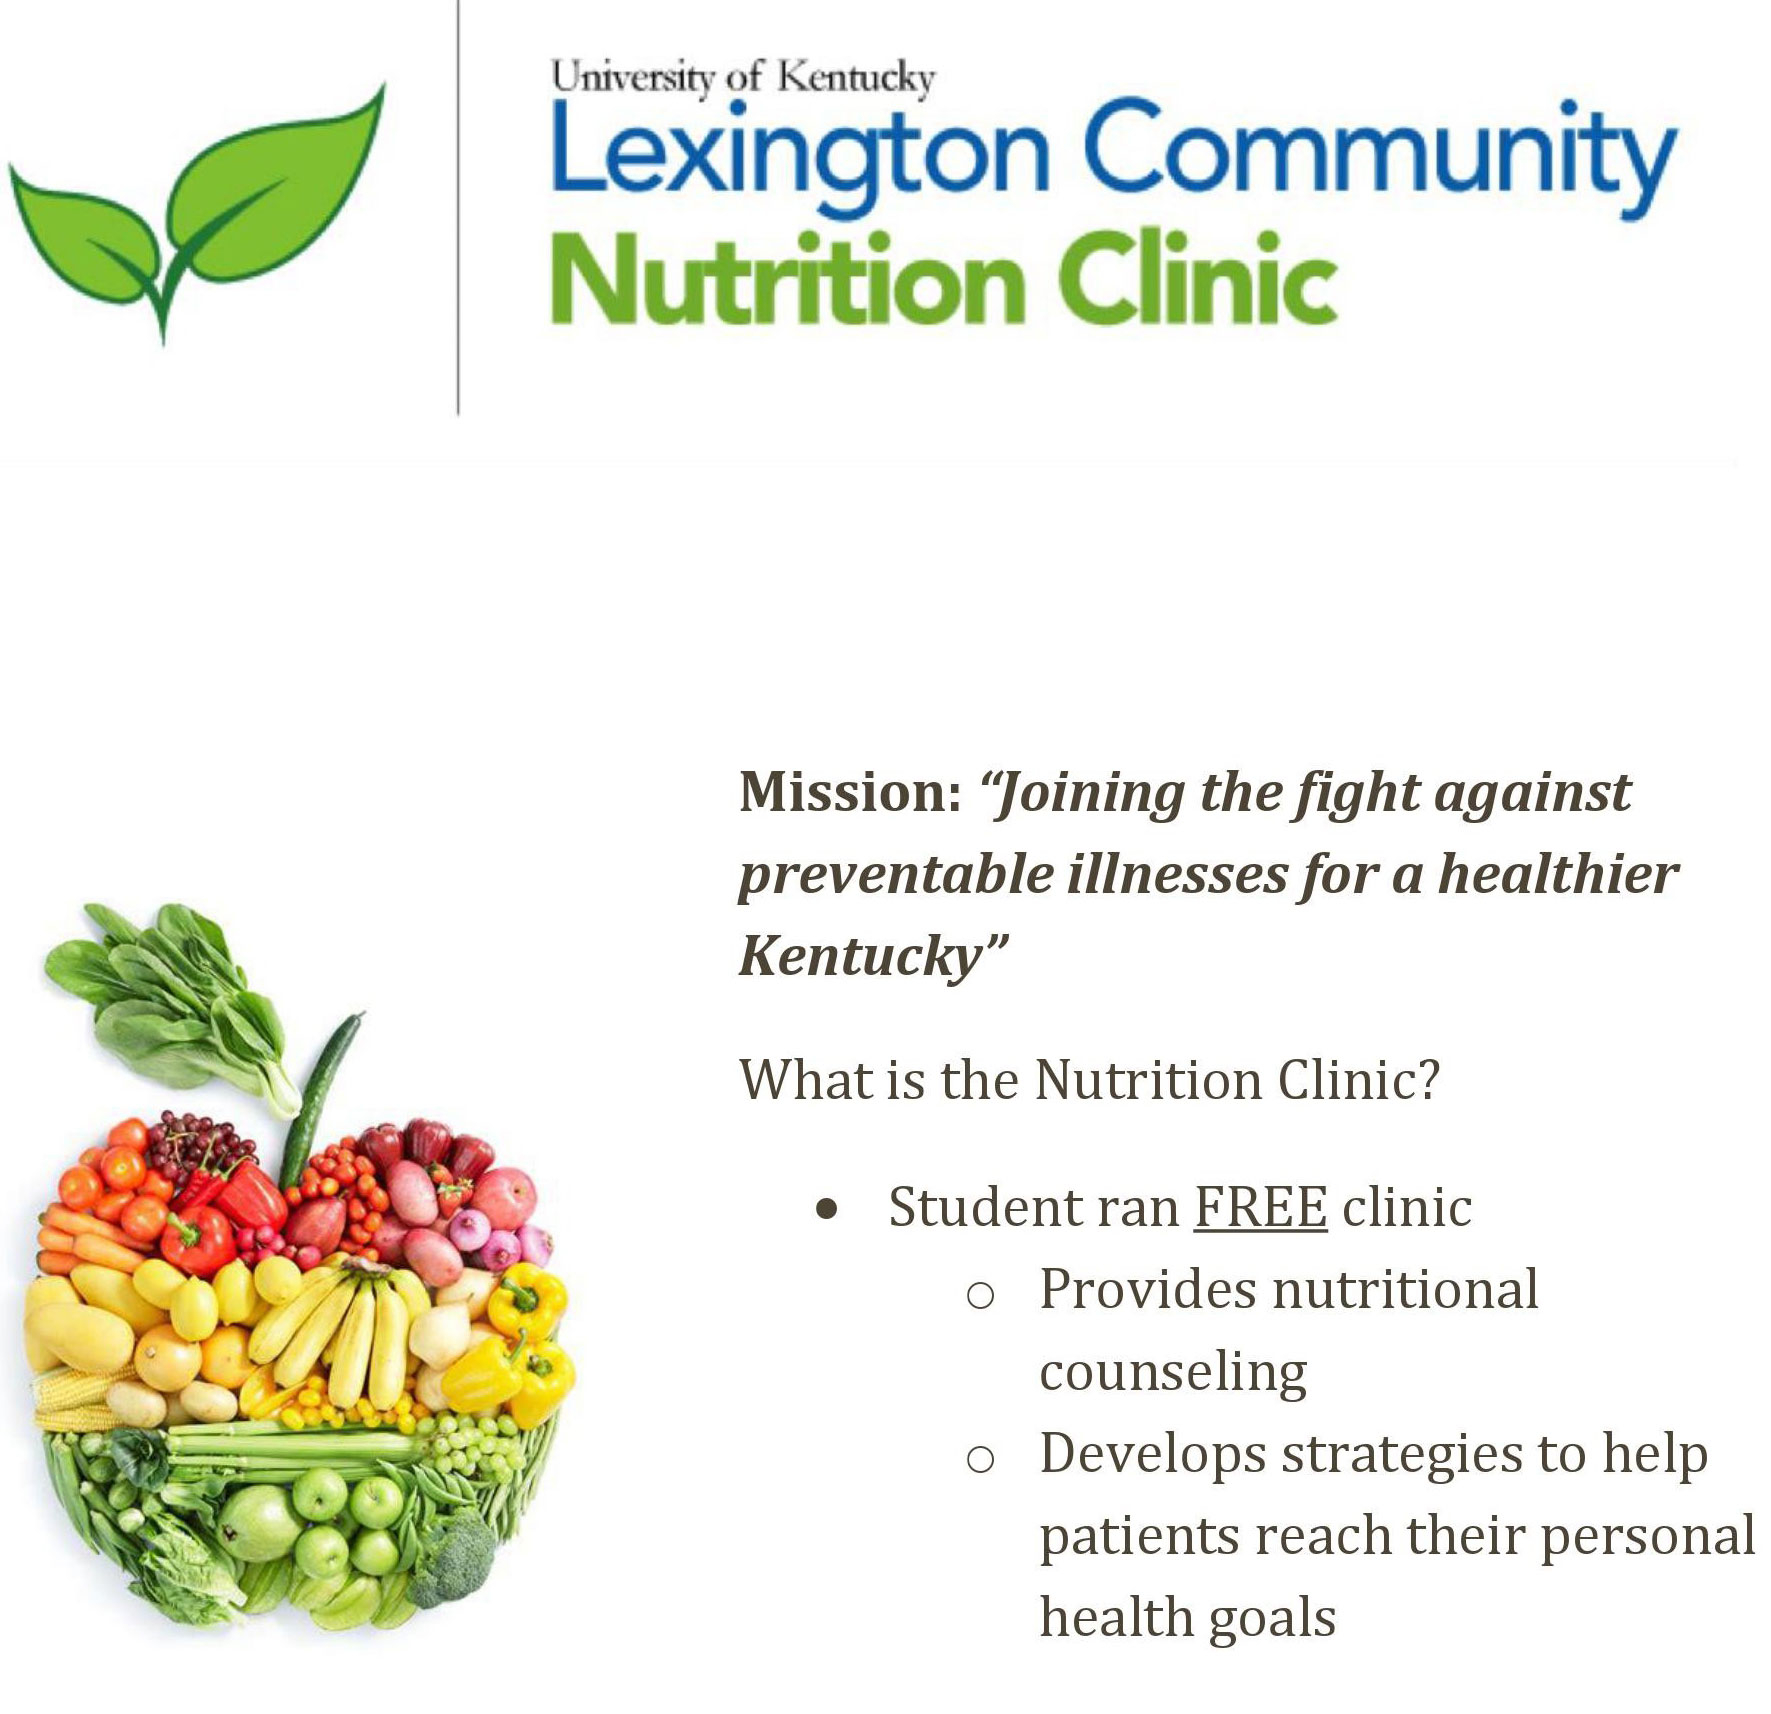 UK Lexington Community Nutrition Clinic. Mission: "Joining the fight against preventable illnesses for a healthier Kentucky." What is the Nutrition Clinic? Student ran FREE clinic - provides nutritional counseling - develops strategies to help patients reach their personal health goals